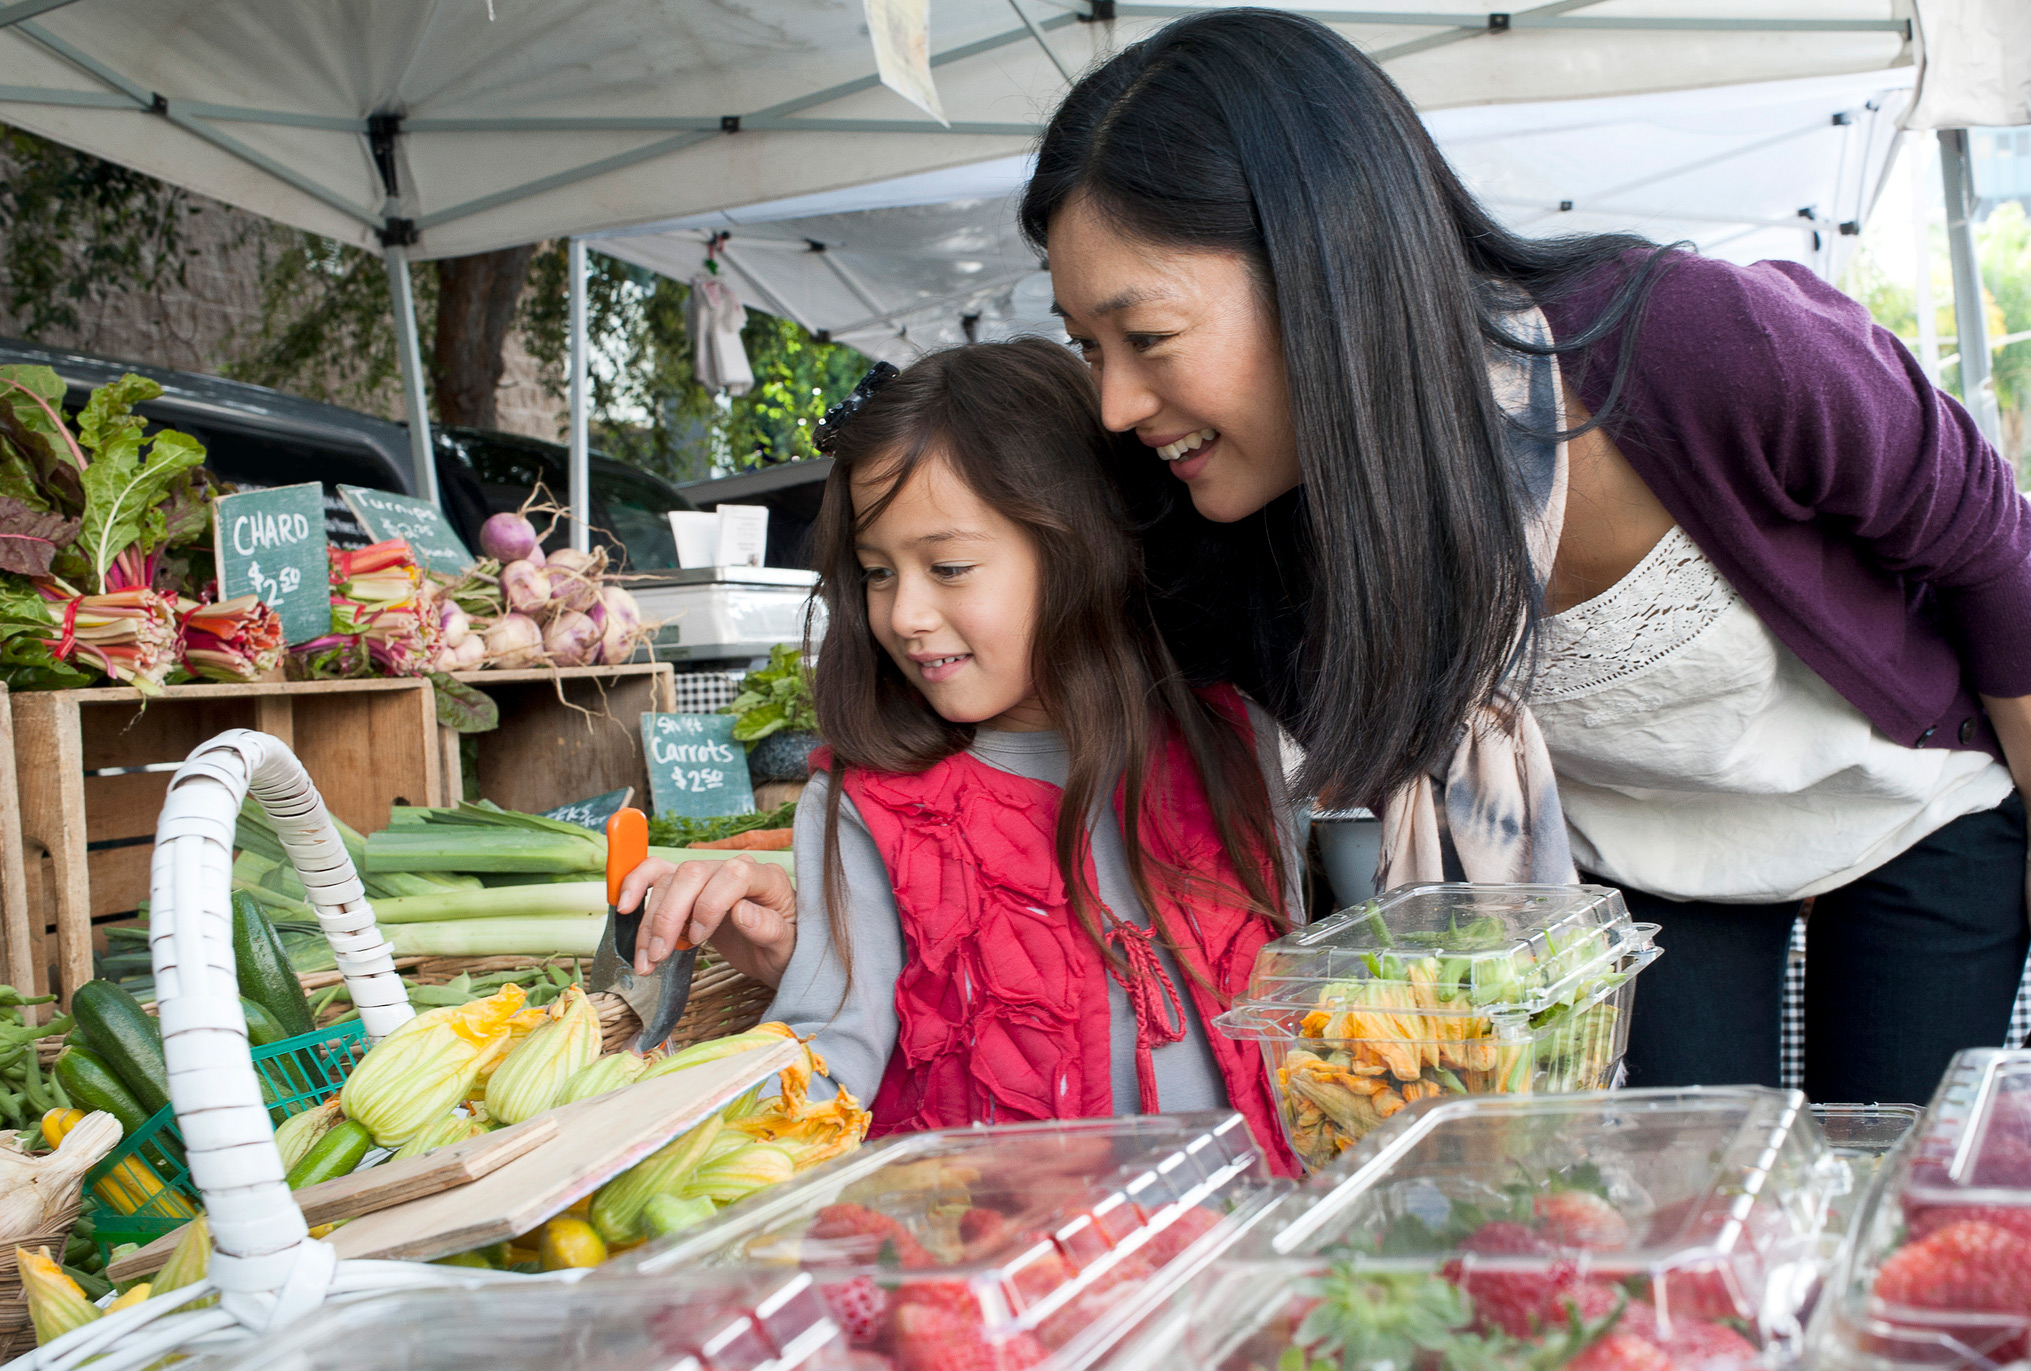 6 ways to get your children excited about eating healthy